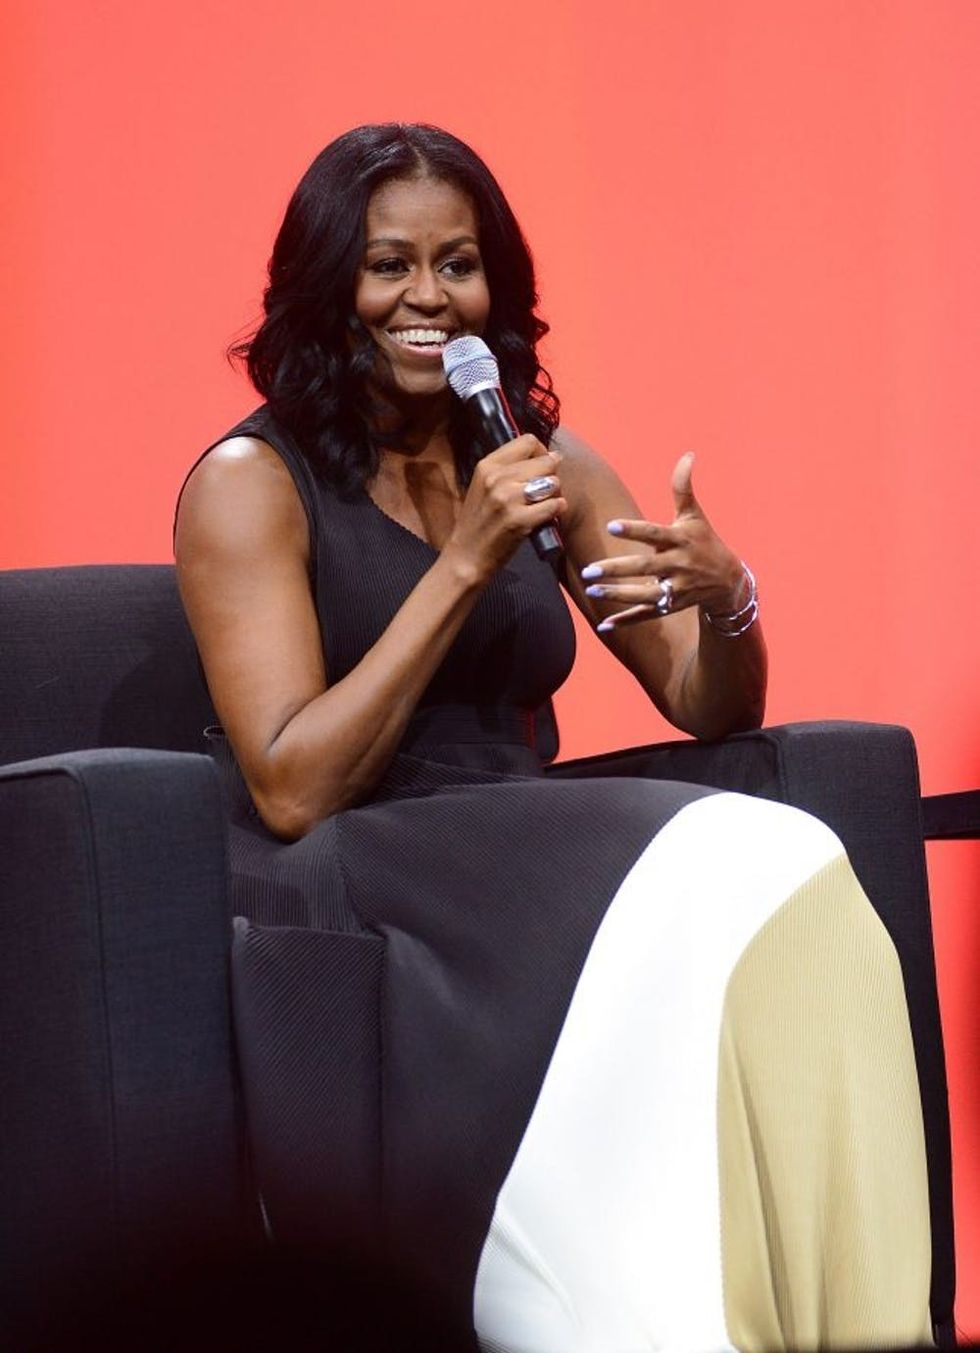 ORLANDO, FL - APRIL 27: Former United States first lady Michelle Obama speaks during the AIA Conference on Architecture 2017 on April 27, 2017 in Orlando, Florida. Michelle Obama is making one of her first public speeches at the Orlando Conference since leaving the White House. (Photo by Gerardo Mora/Getty Images)